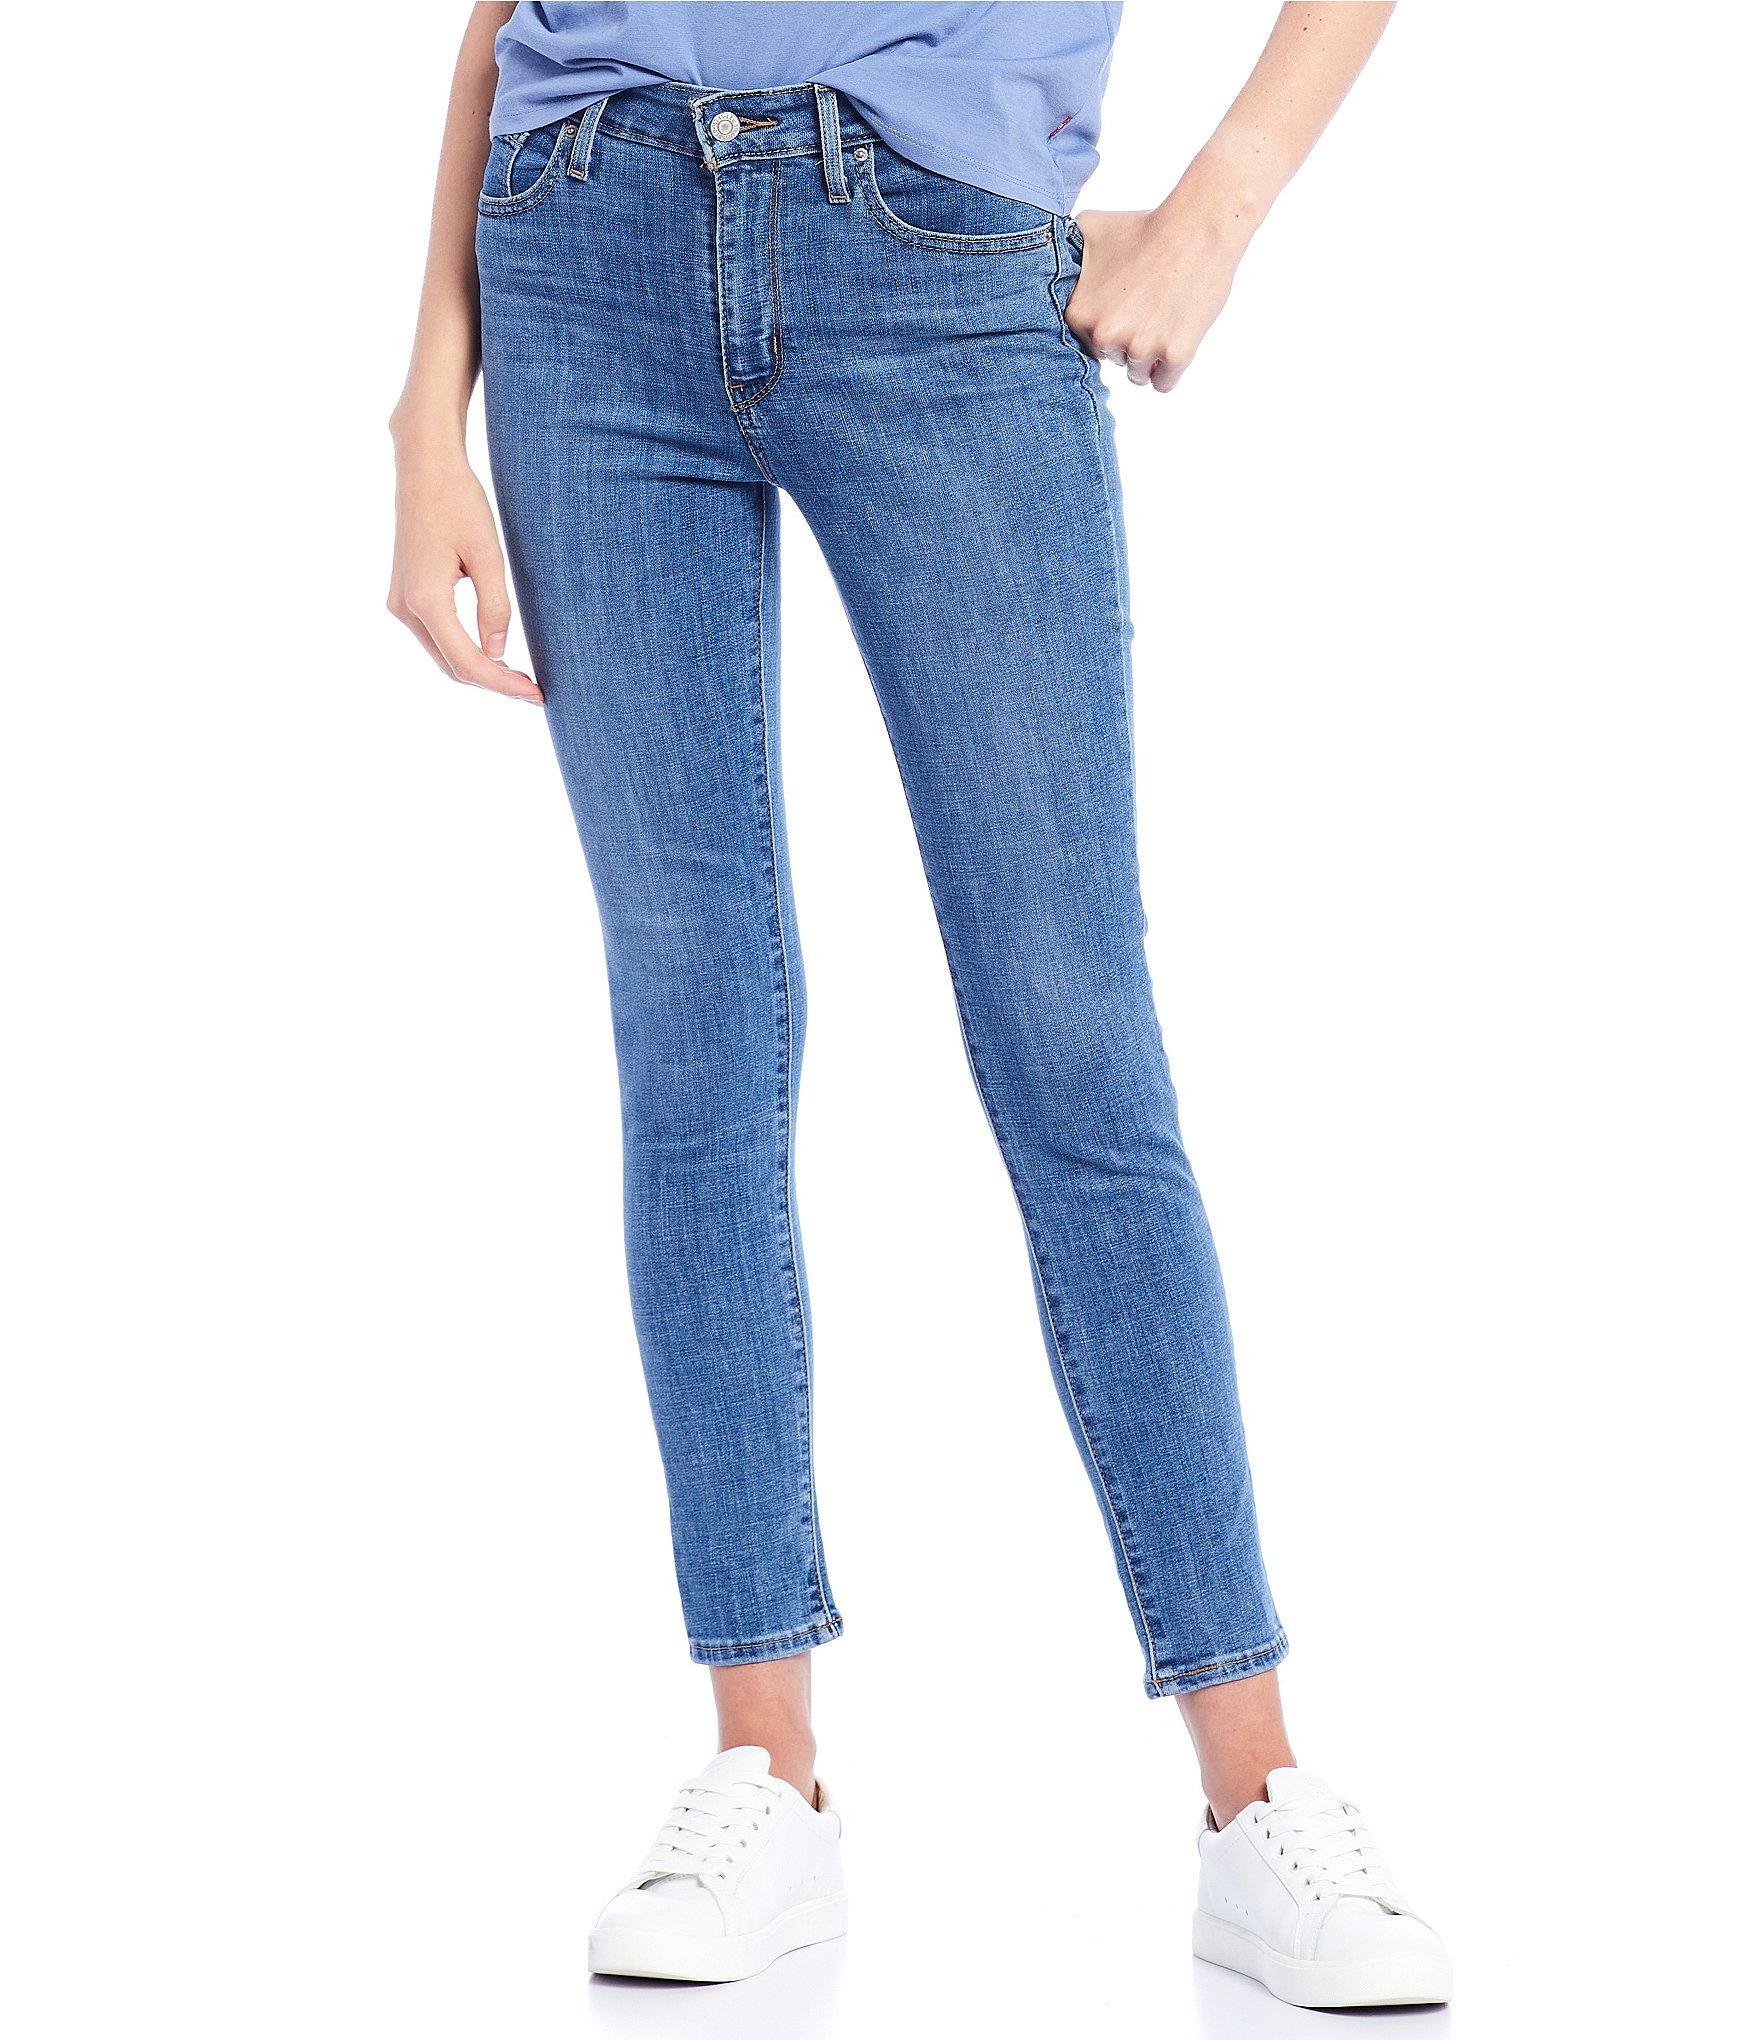 levi's high rise 721 skinny jeans